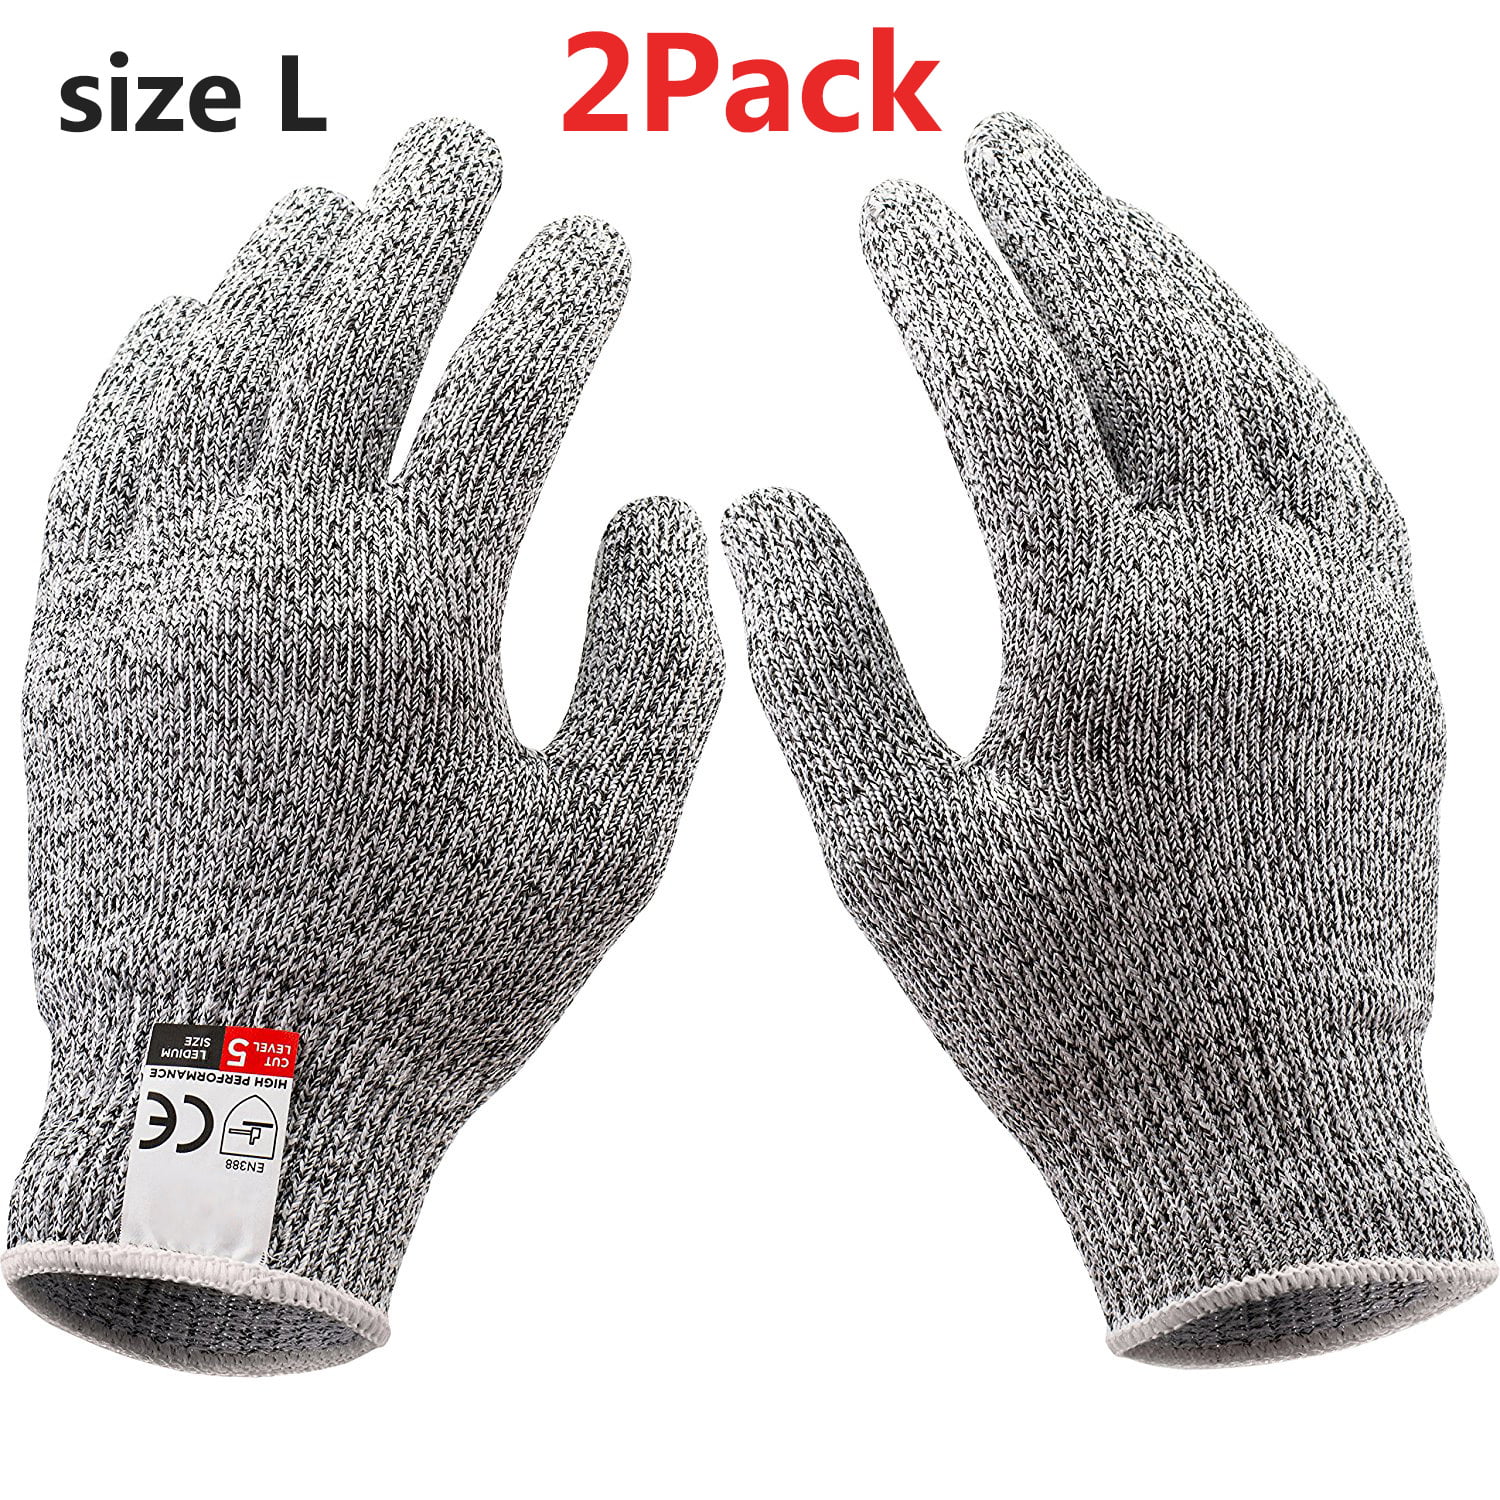 NoCry Cut Resistant Gloves Kitchen Large, TECBOX High Performance CE Level  5 Protection, Food Grade Kitchen and Work Safety Gloves - Size Large, Gray  2Pack 